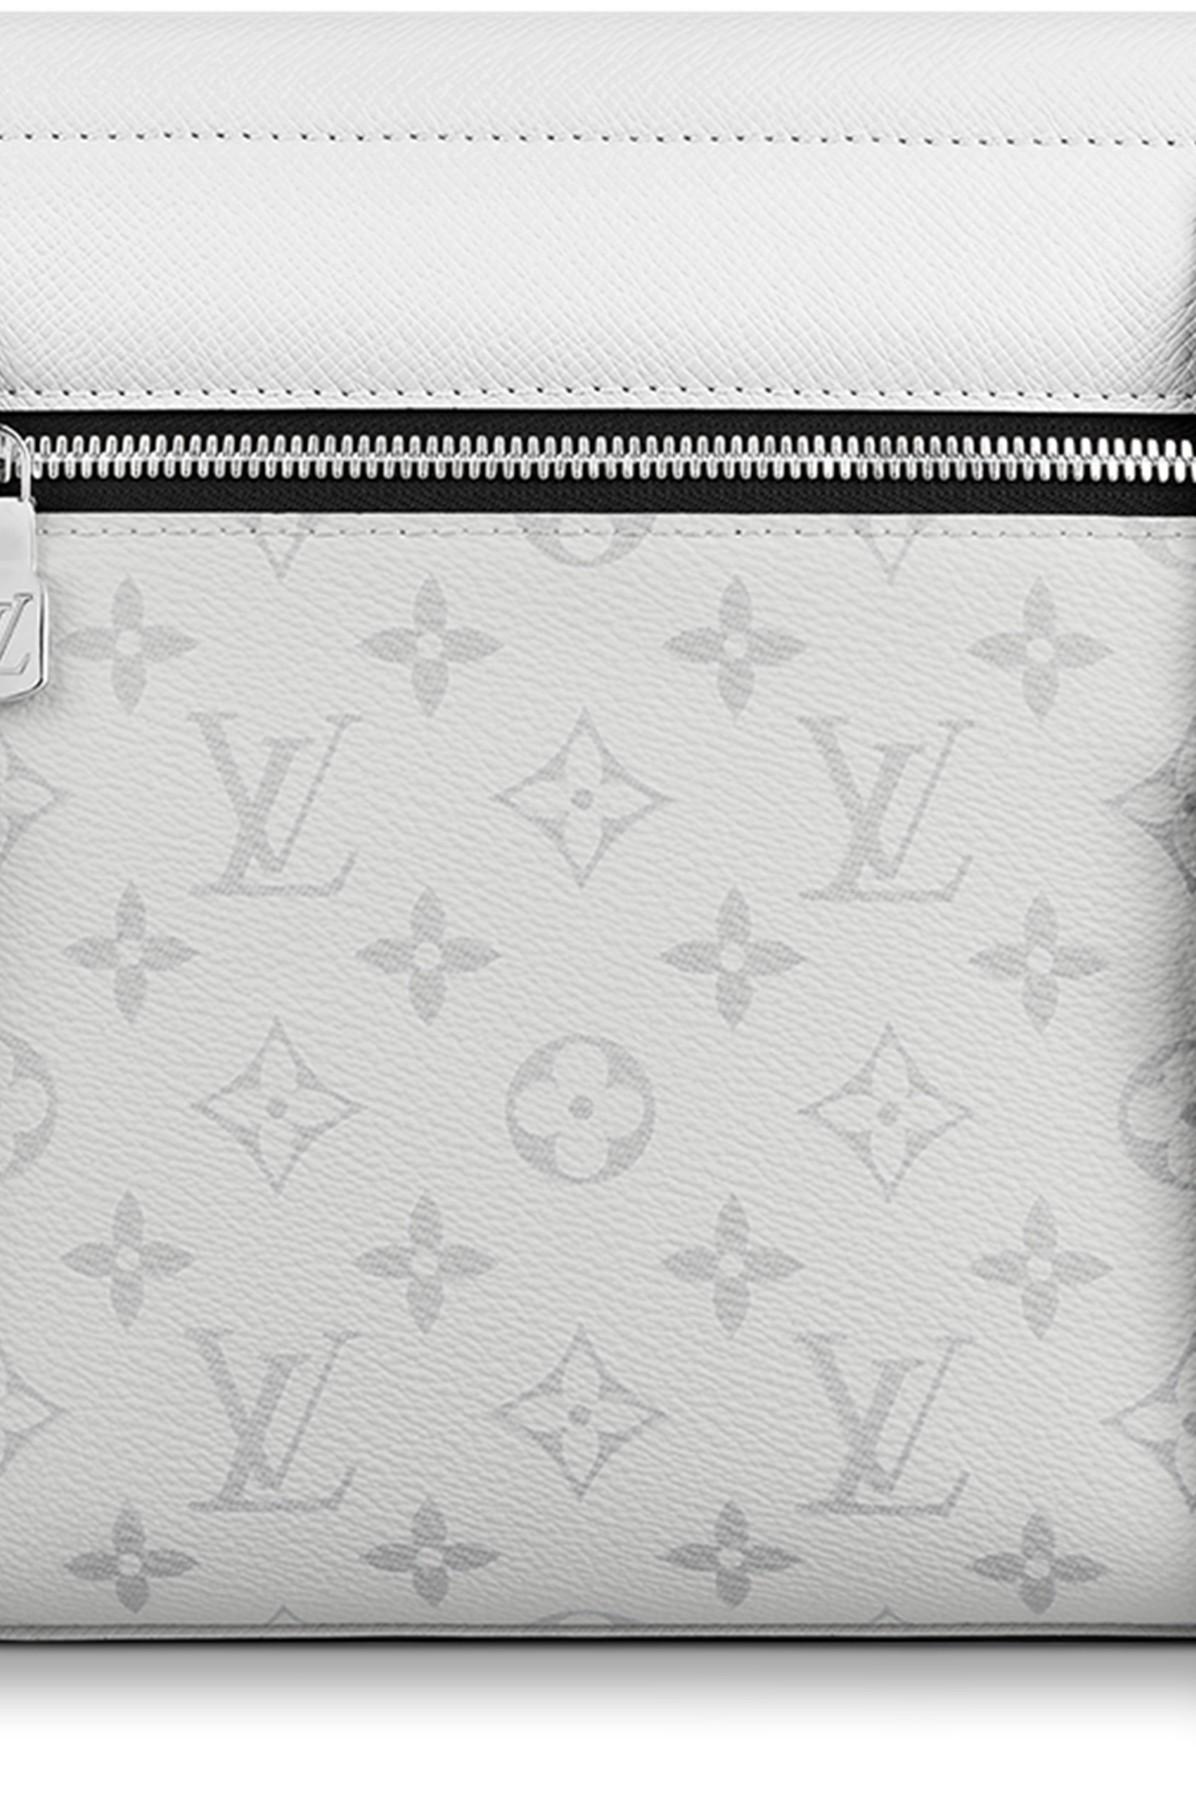 Louis Vuitton LV Outdoor flap messenger new White Leather ref